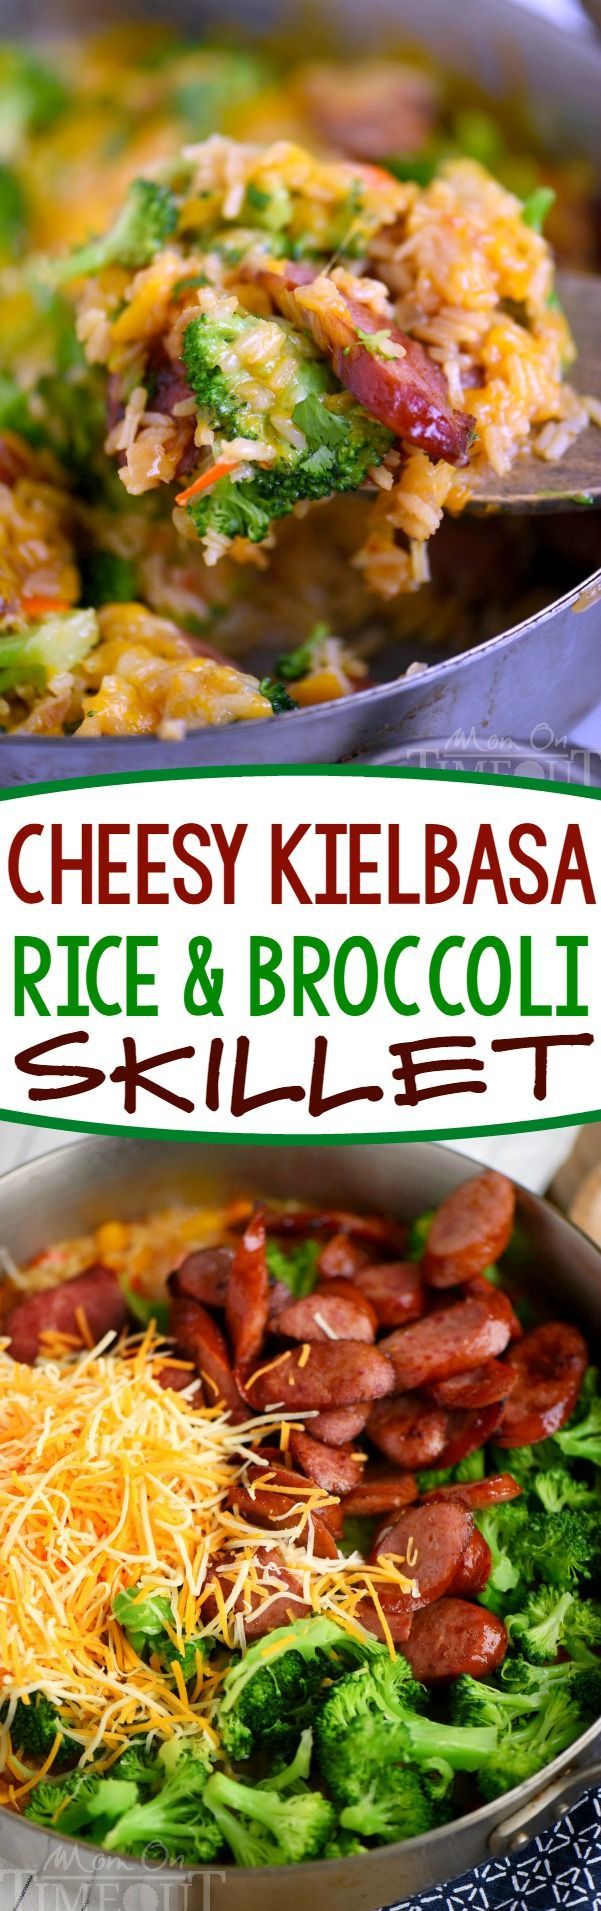 Cheesy Kielbasa, Rice and Broccoli Skillet – your new favorite dinner! This easy skillet recipe comes together in a flash and is